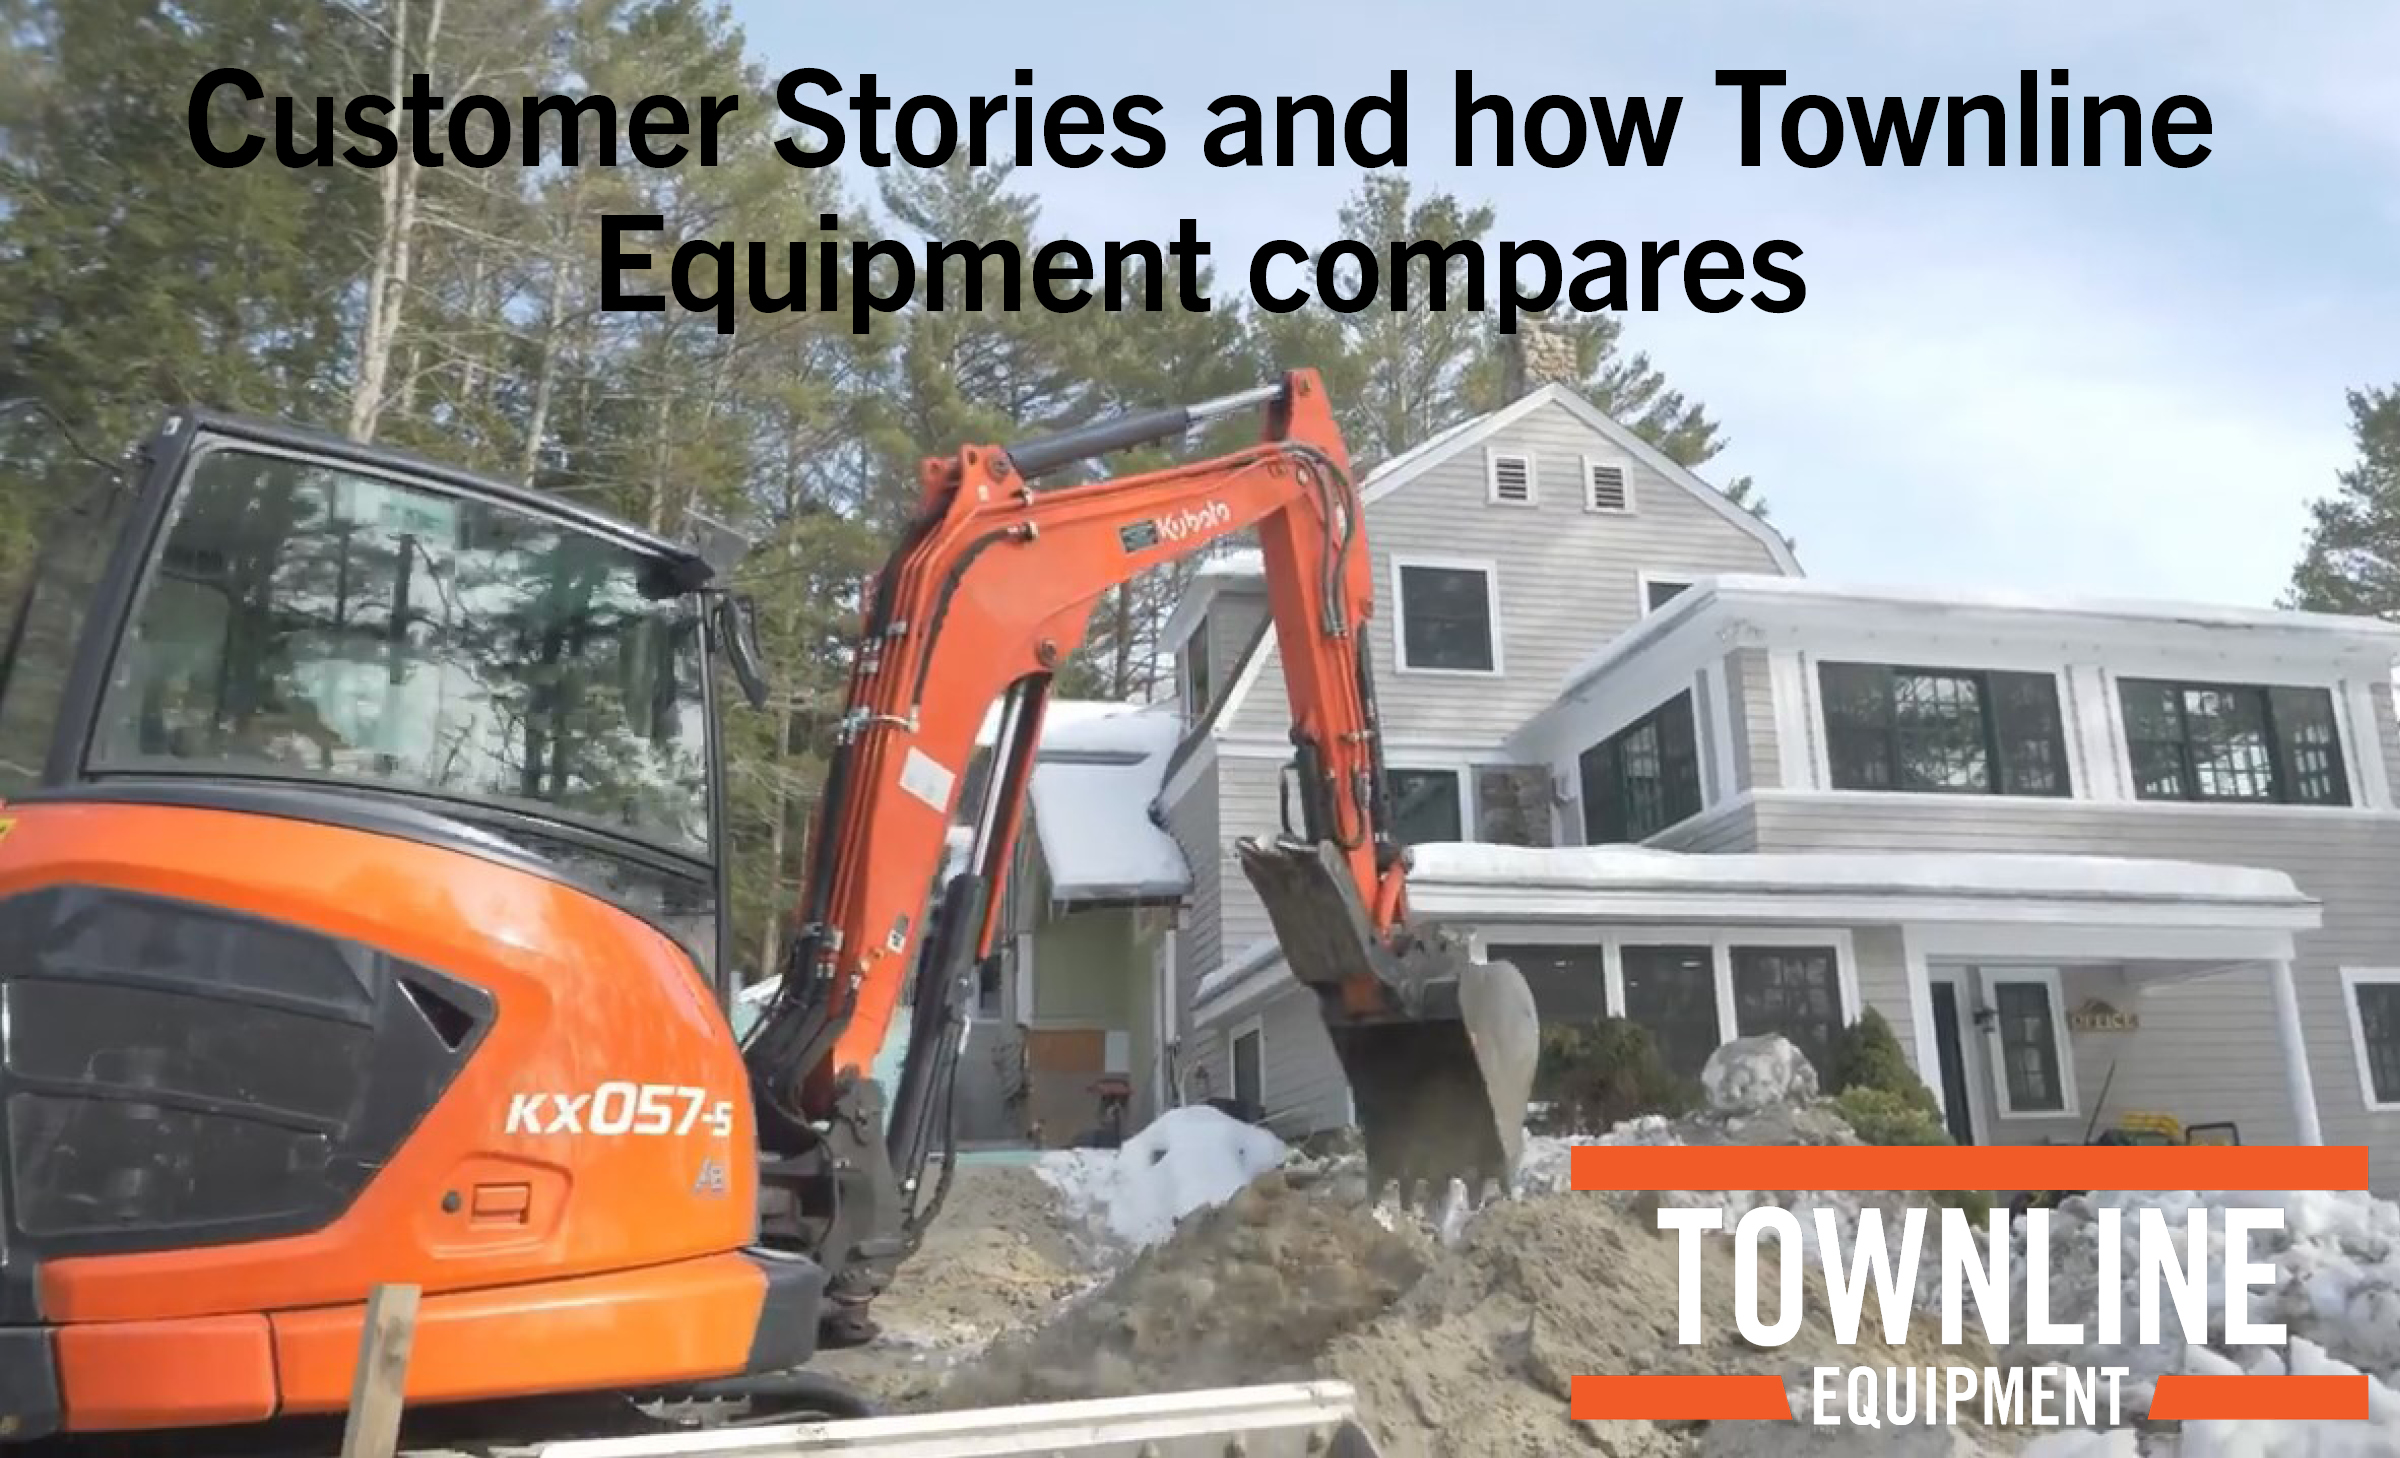 Customer Stories with Townline Equipment